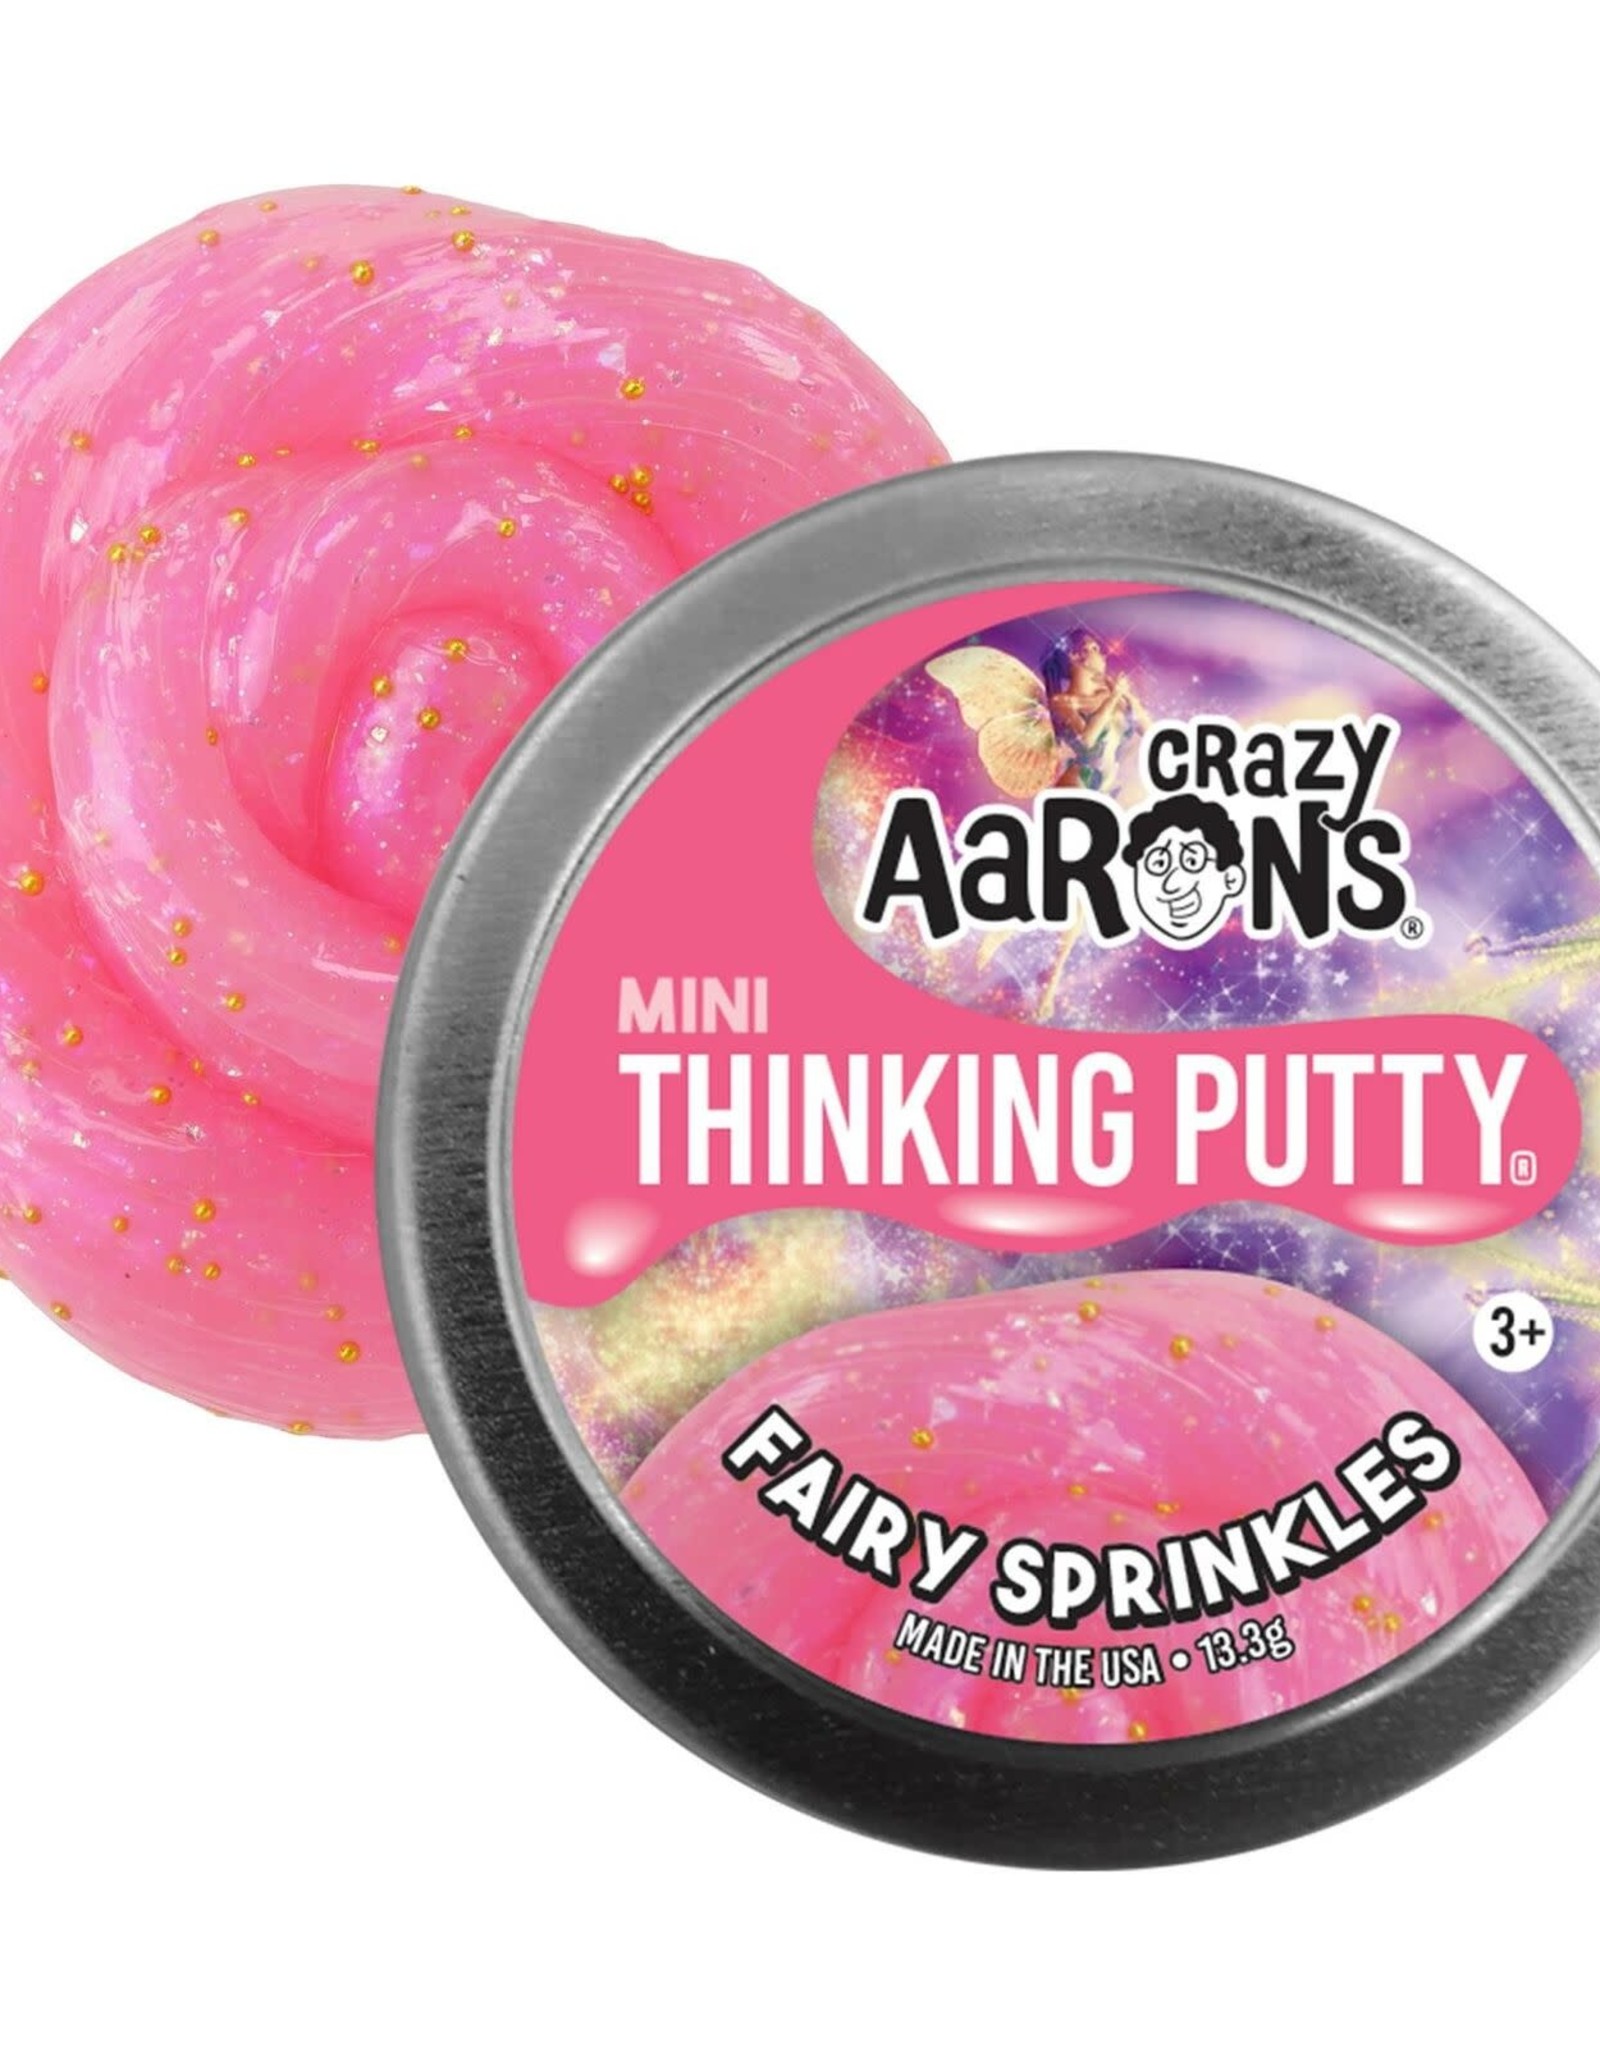 Crazy Aaron's Thinking Putty Crazy Aarons  Fairy Sprinkles 2"